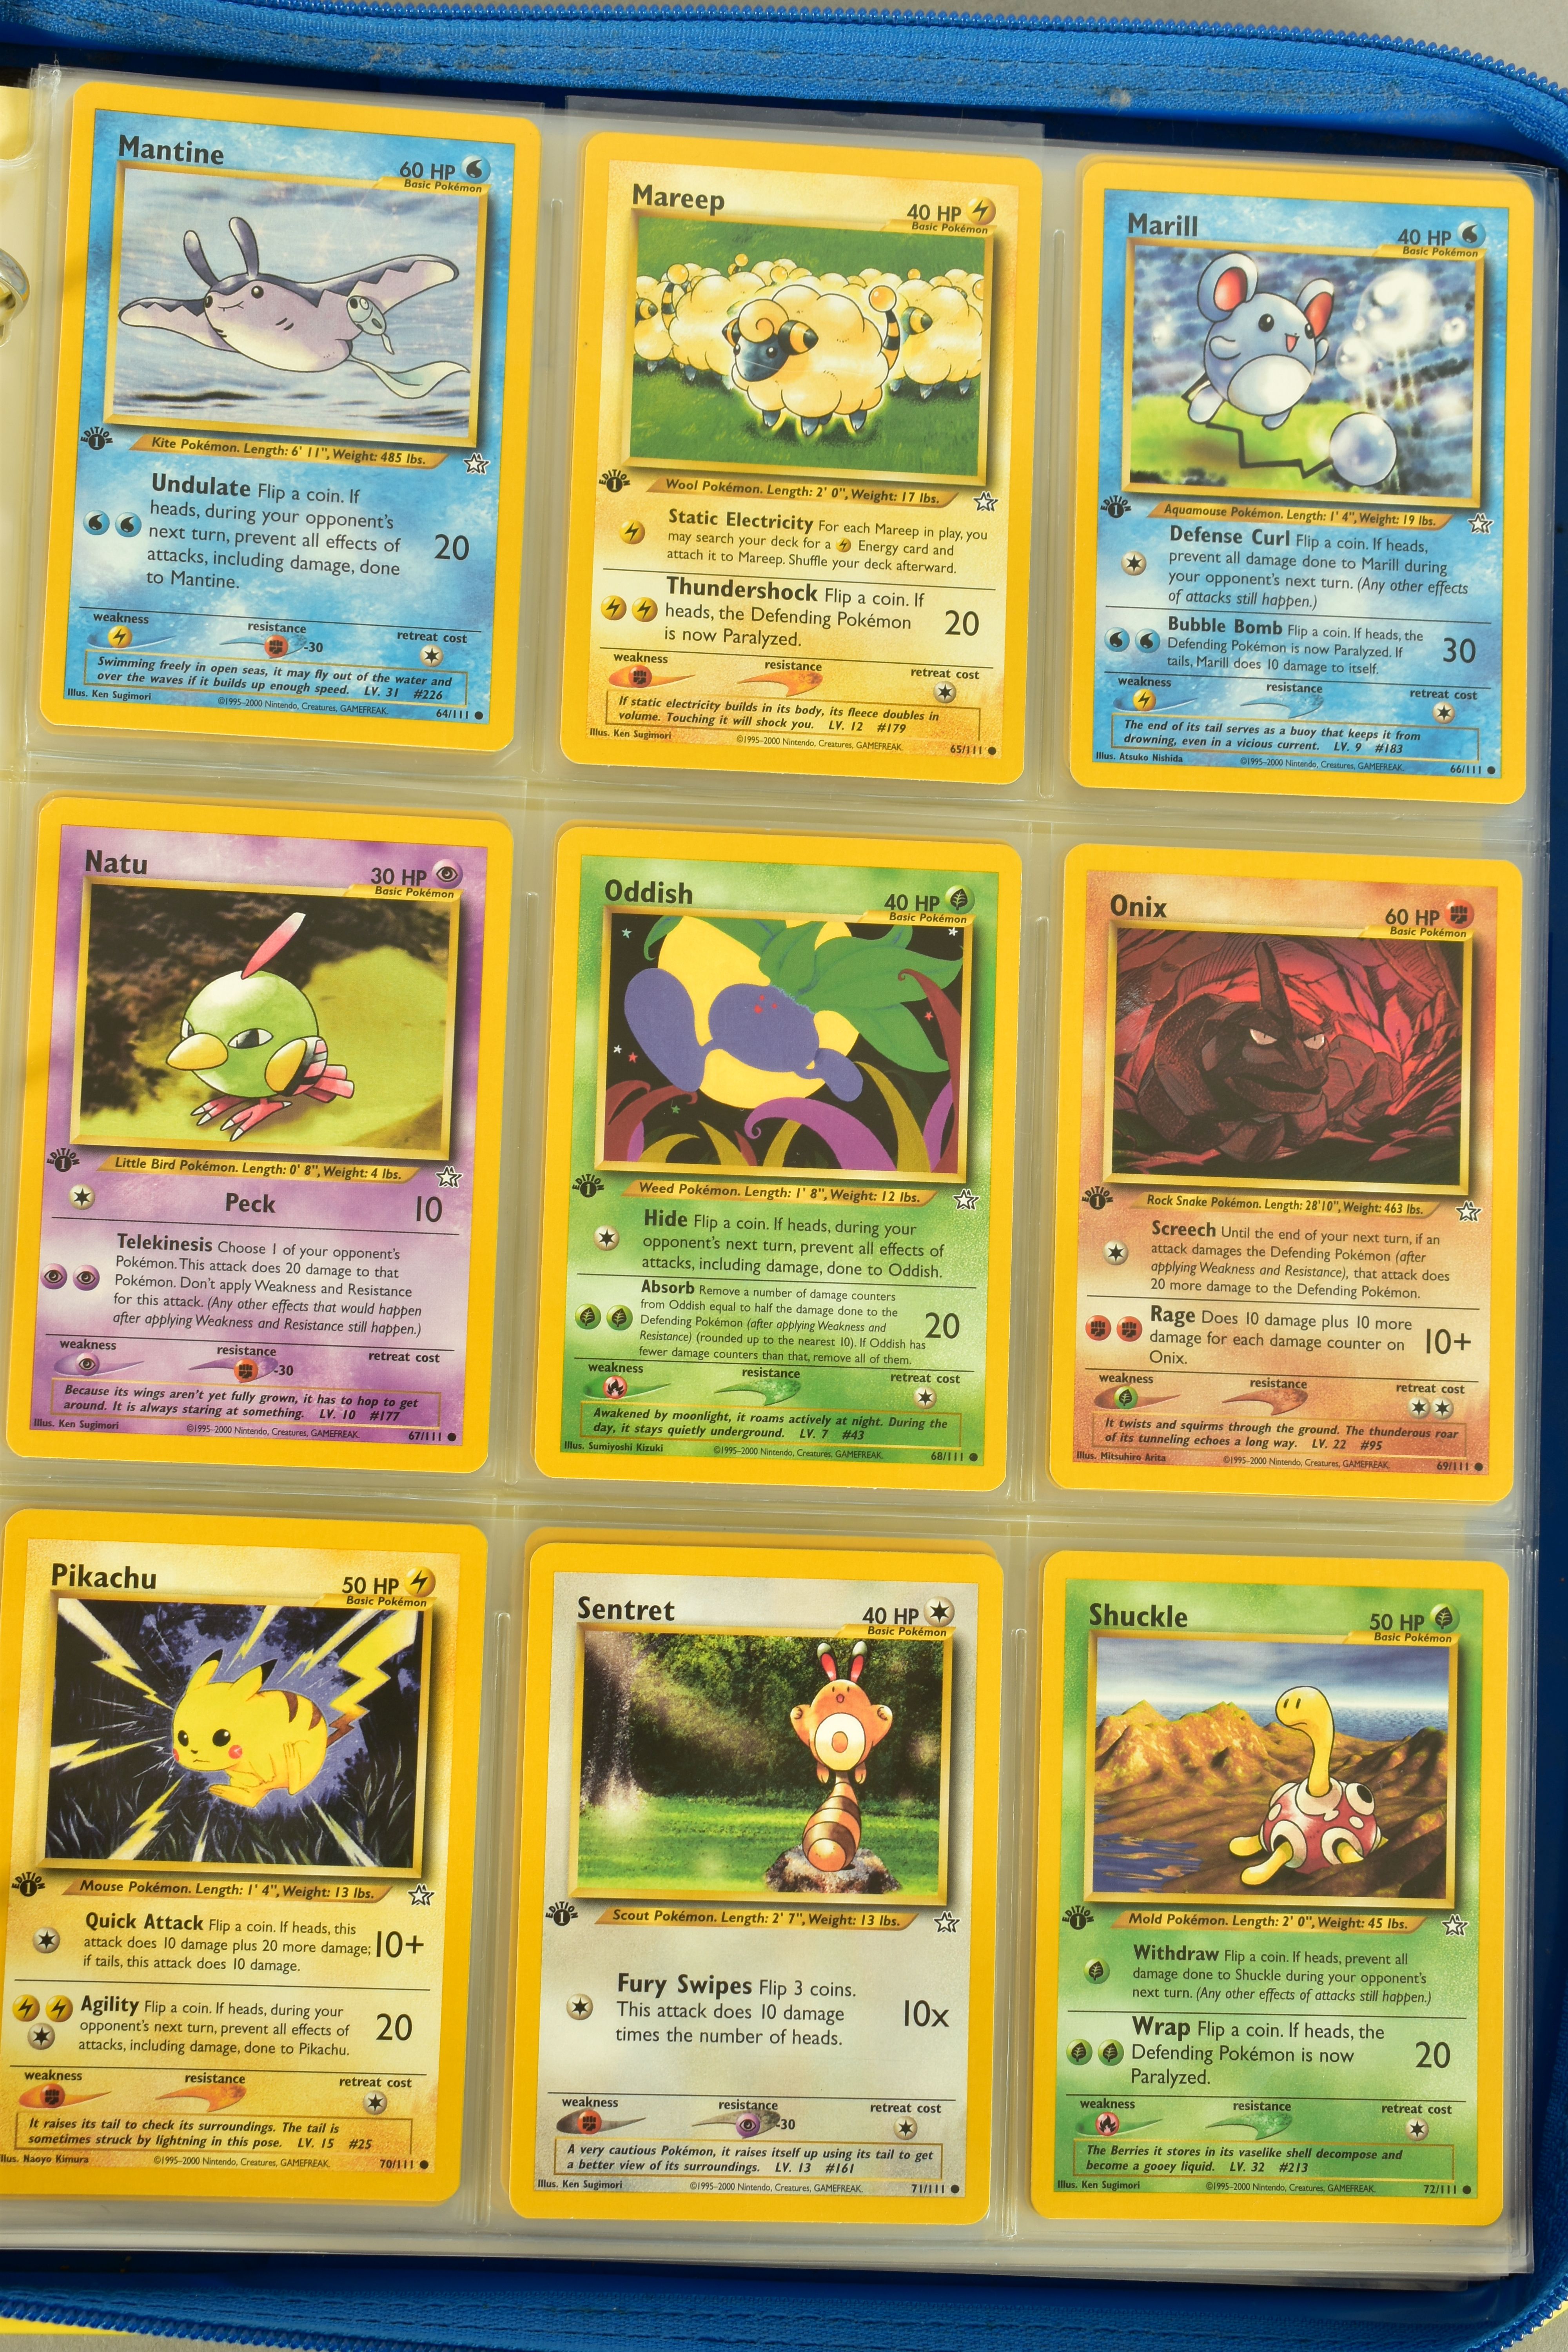 THE COMPLETE POKEMON CARD NEO GENESIS AND NEO DISCOVERY SETS, containing many first edition cards. - Image 13 of 32